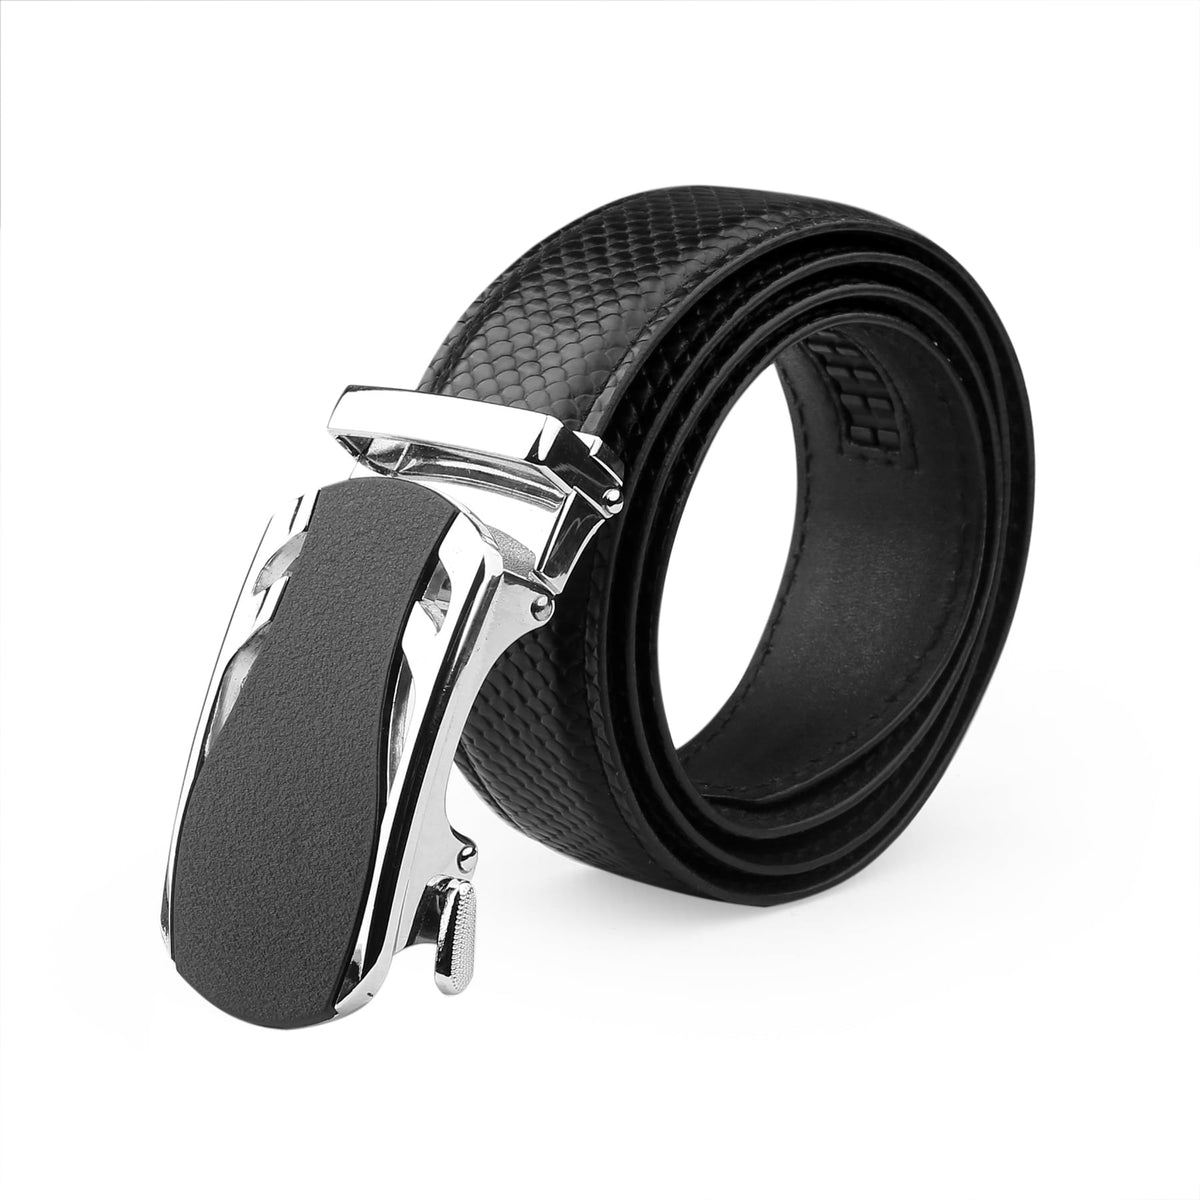 Bacca Bucci Premium Leather Formal Dress Belts with a Stylish Finish & a Auto Lock Nickel-Free Buckle